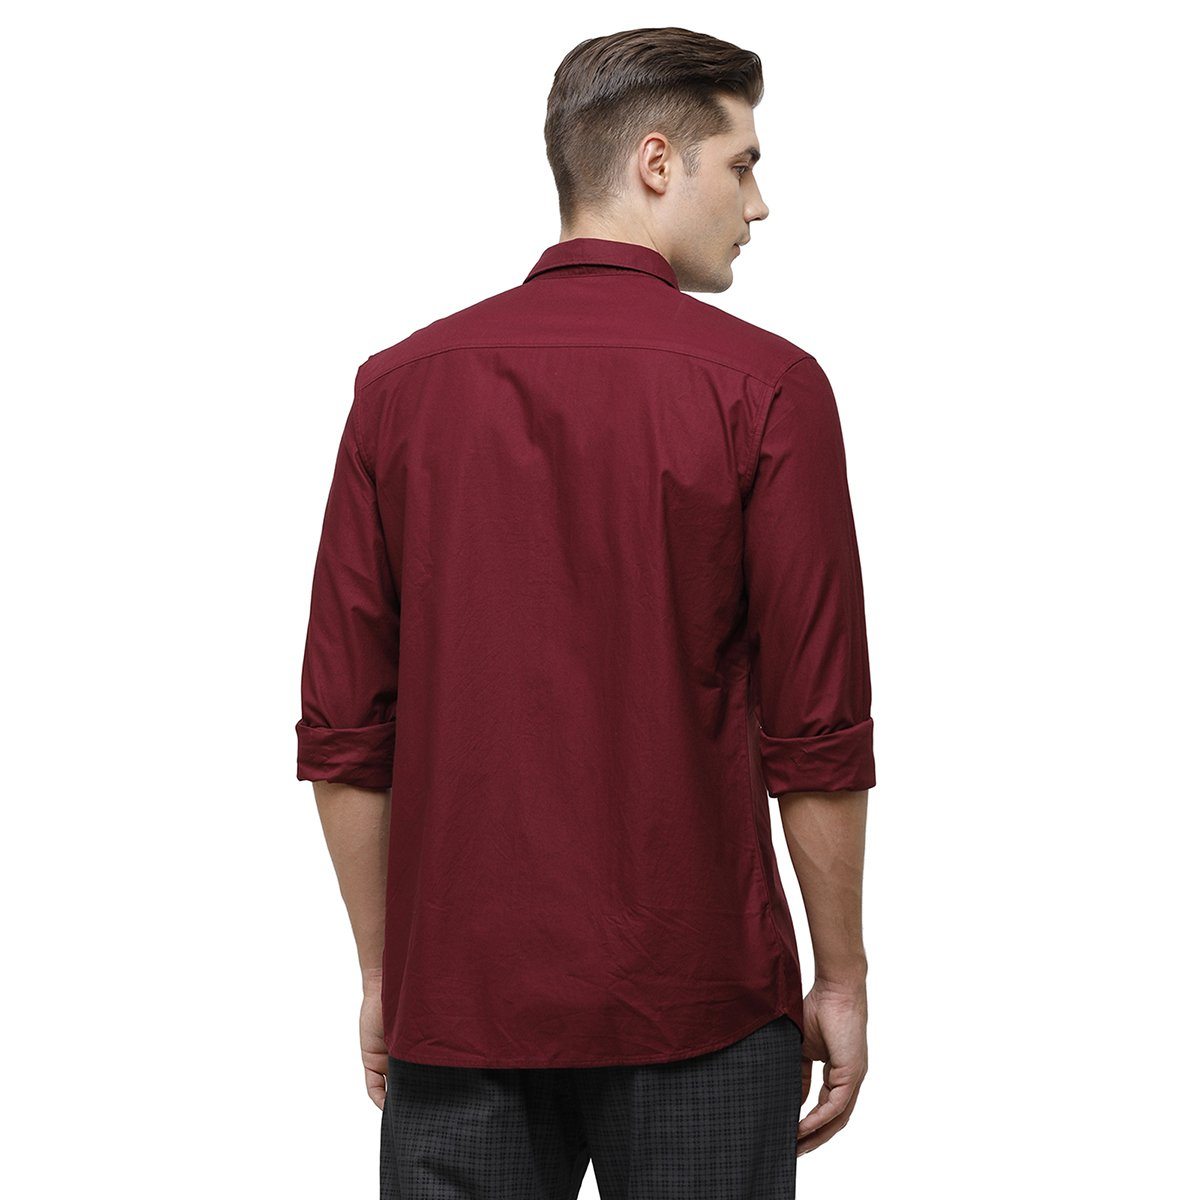 Classic Polo Mens Collar Neck Full Sleeve Wine Smart Fit 100% Cotton Woven Shirt SM1-68 A-FS-SLD-SF Shirts Classic Polo 